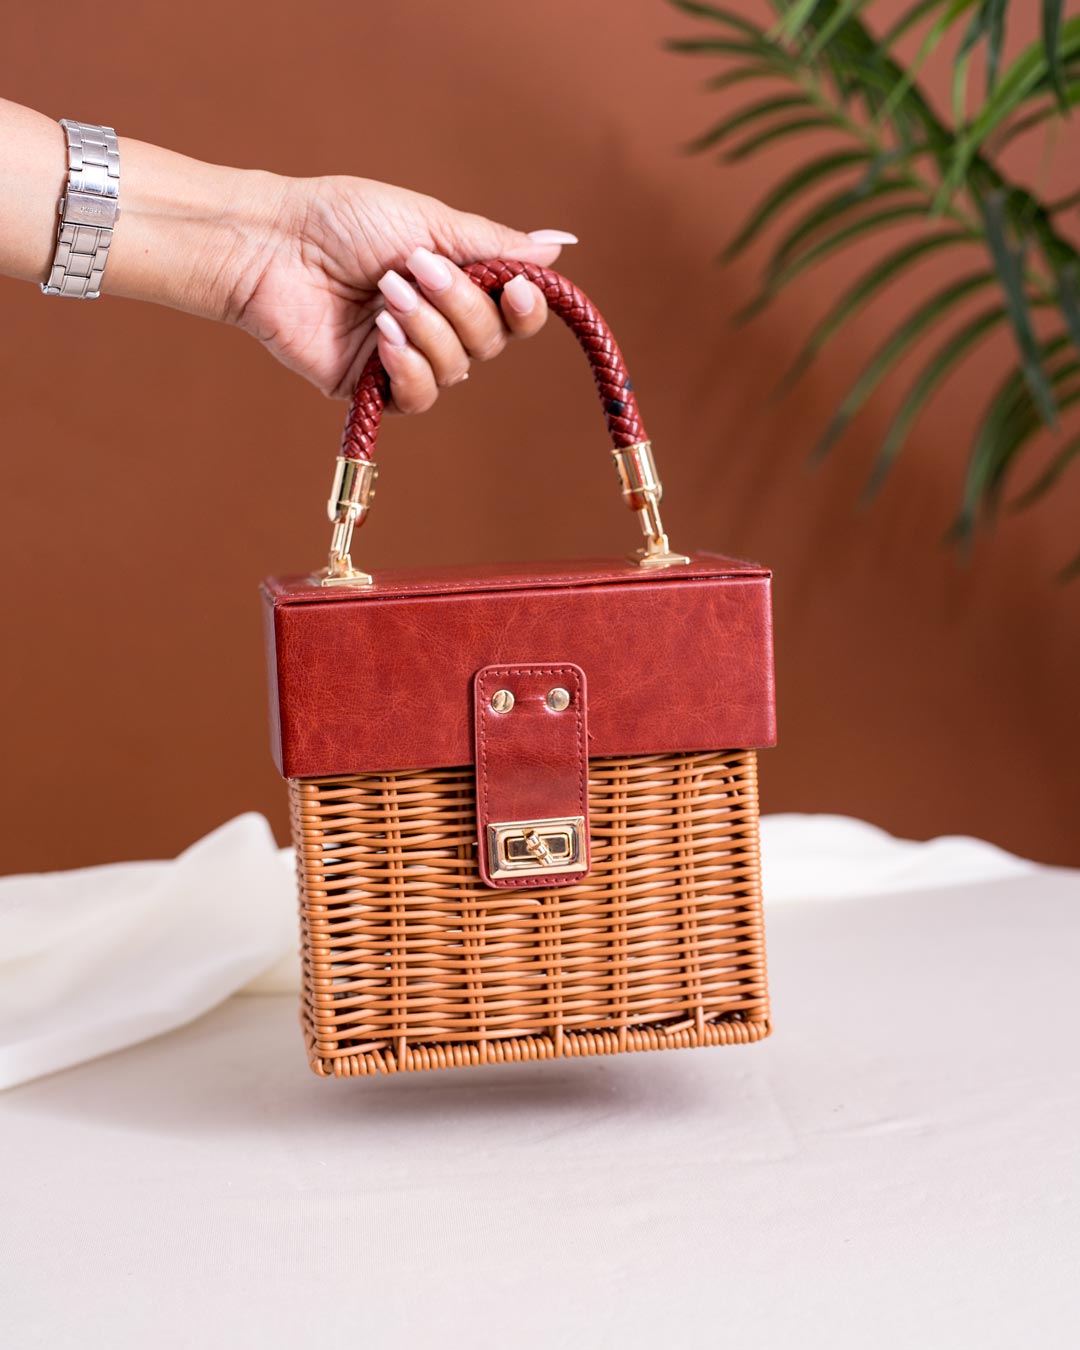 Aesthetic Woven storage basket with handles